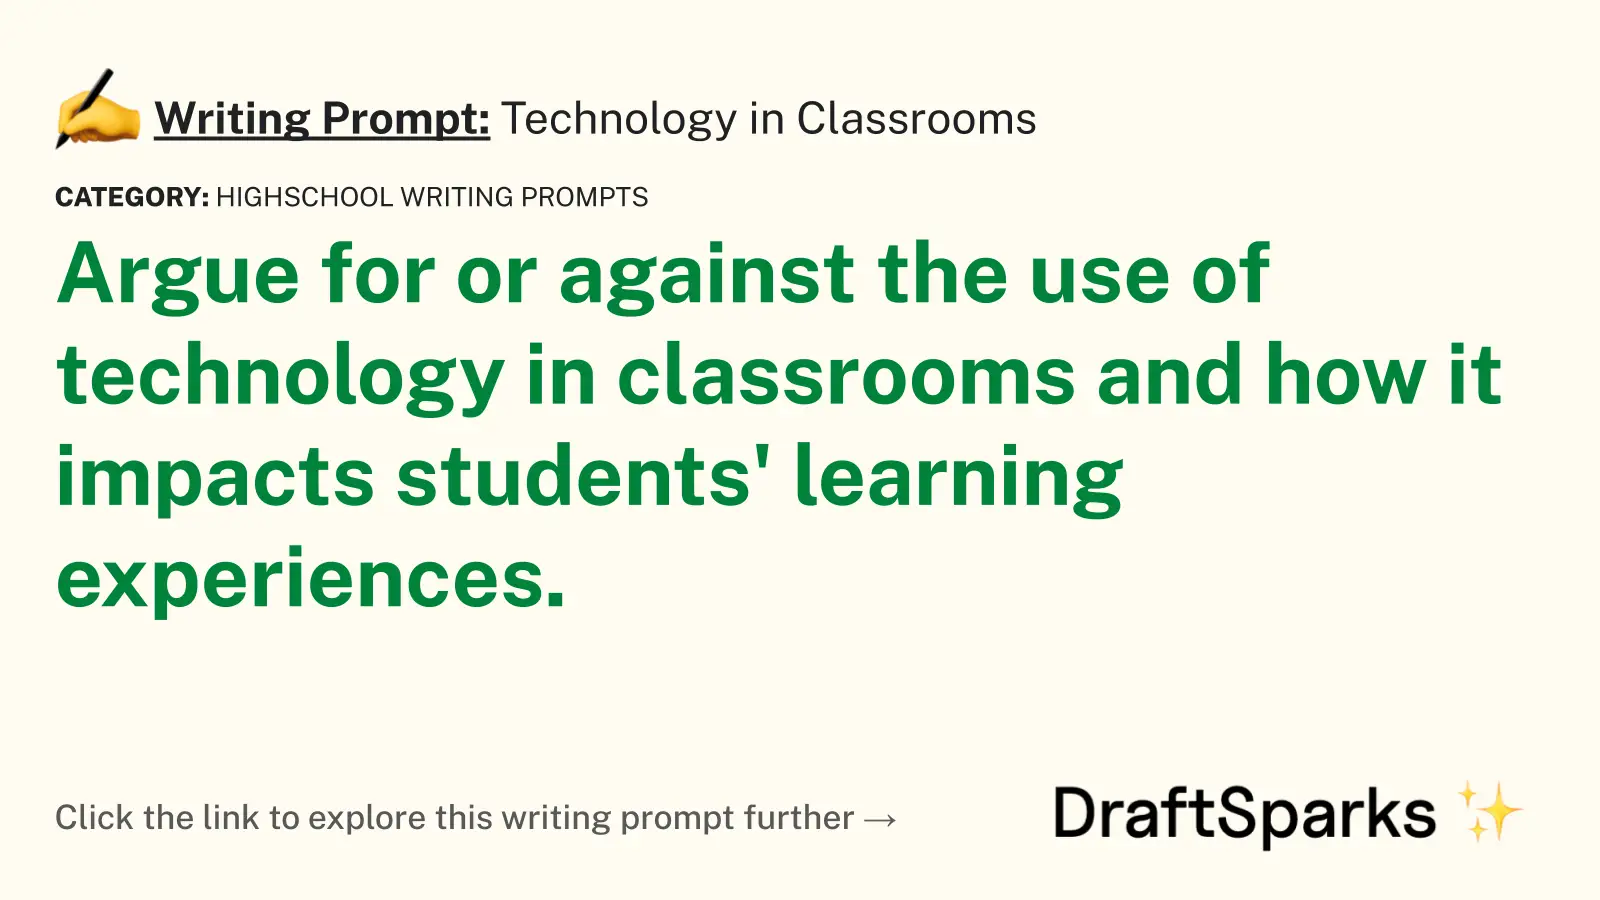 Technology in Classrooms